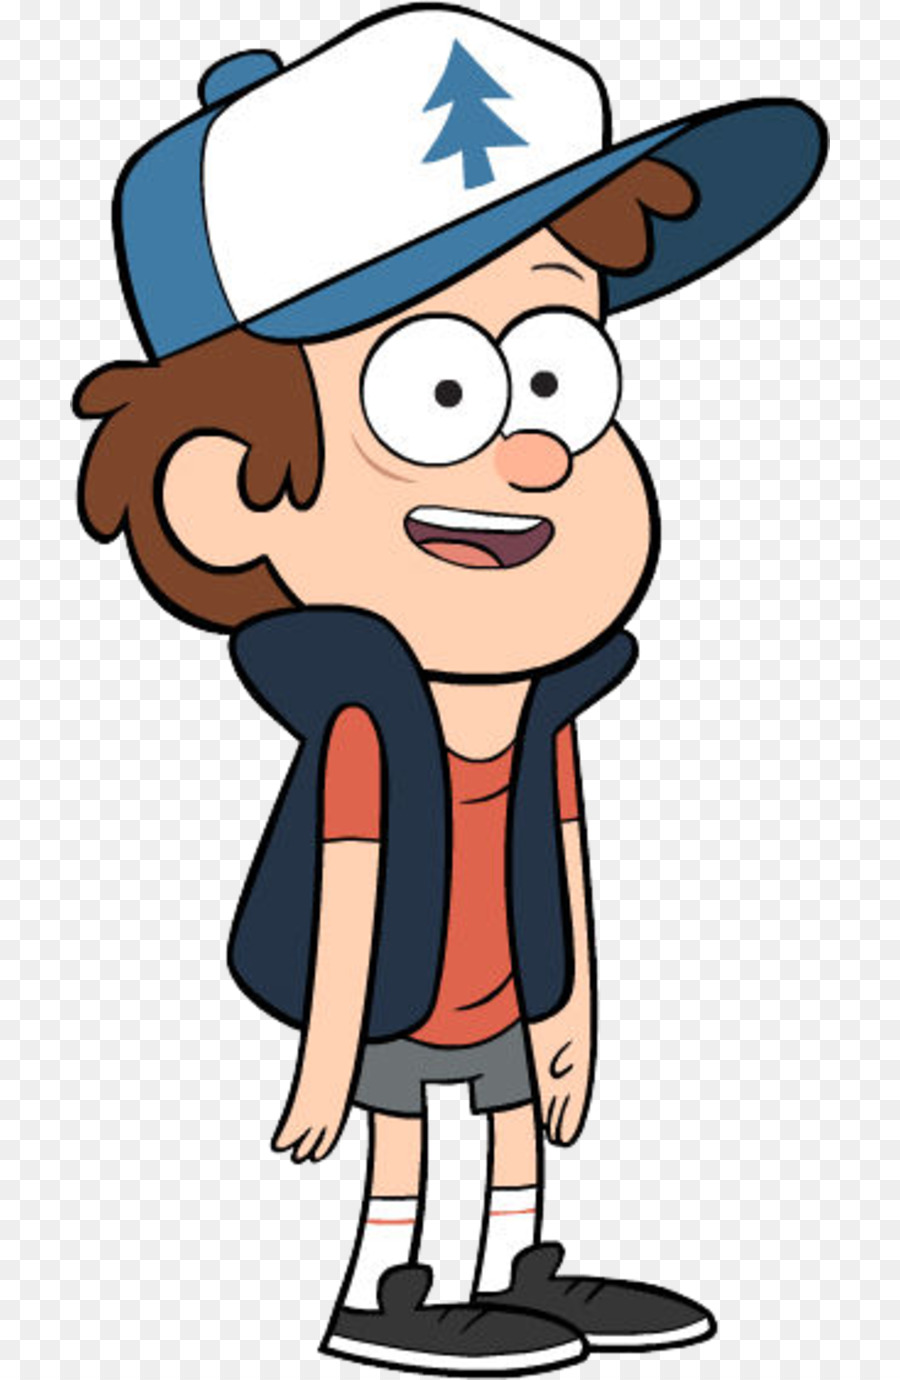 Dipper Pines Mabel Pines Character Disney Channel Gravity Falls - Griffin png download - 760*1380 - Free Transparent Dipper Pines png Download.